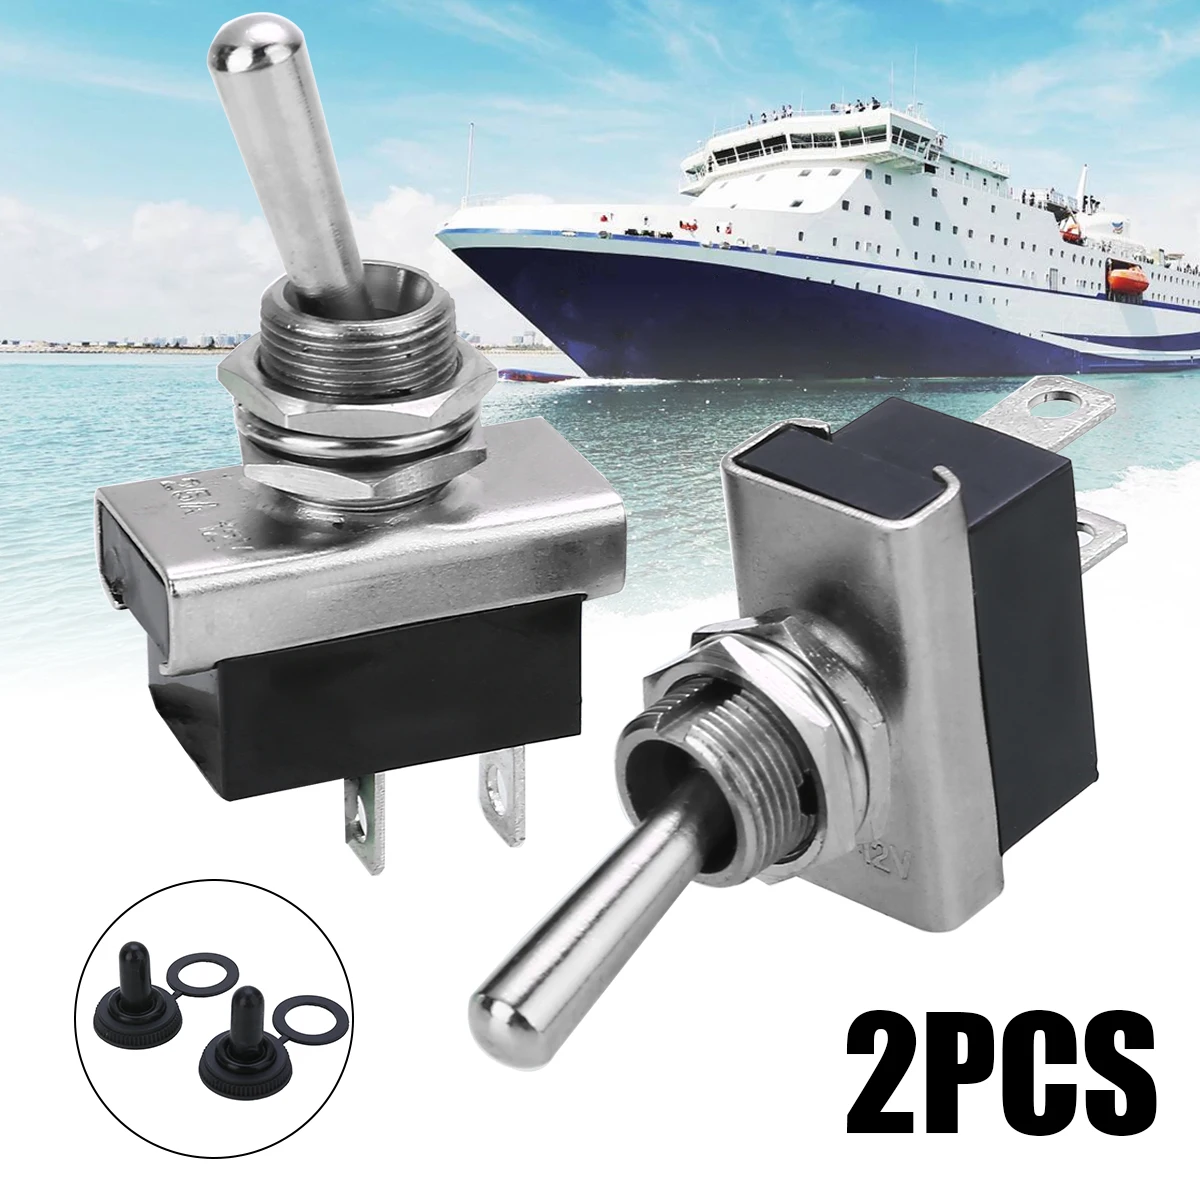 1 Pair 12V 25A Auto Toggle Switch Boat Marine Heavy Duty Flick Switches with Waterproof Cover